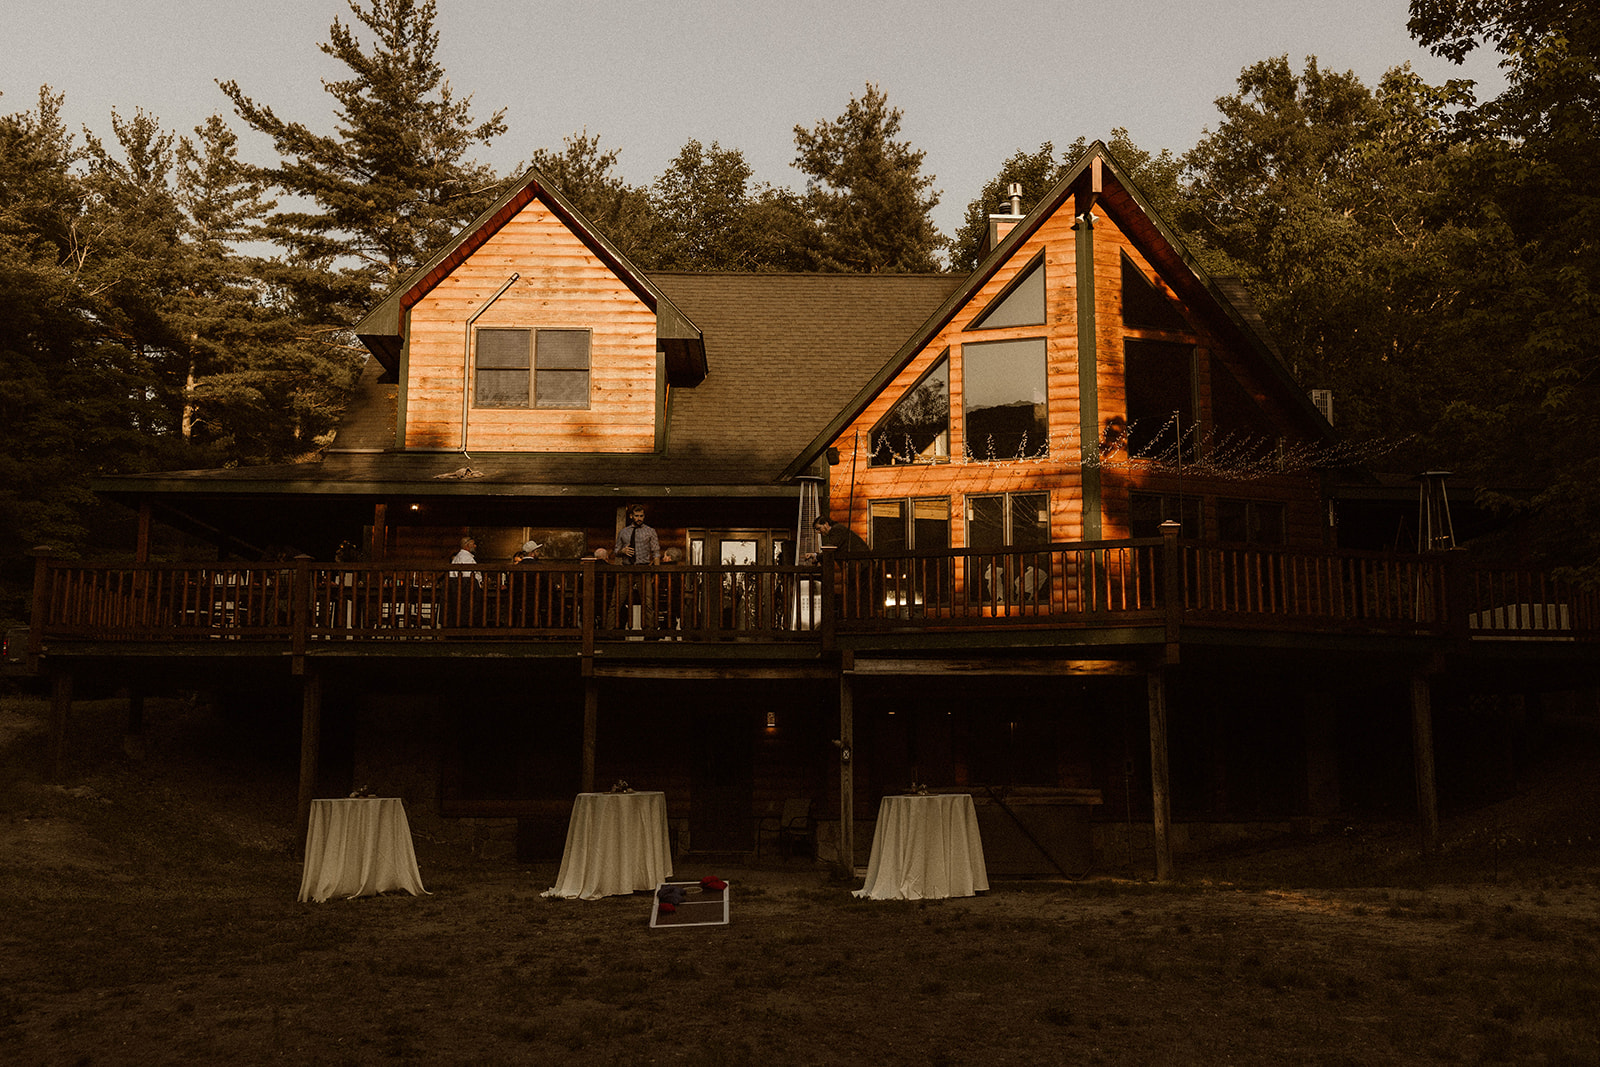 Stunning EBS View lodge venue nestled in the Adirondack mountains